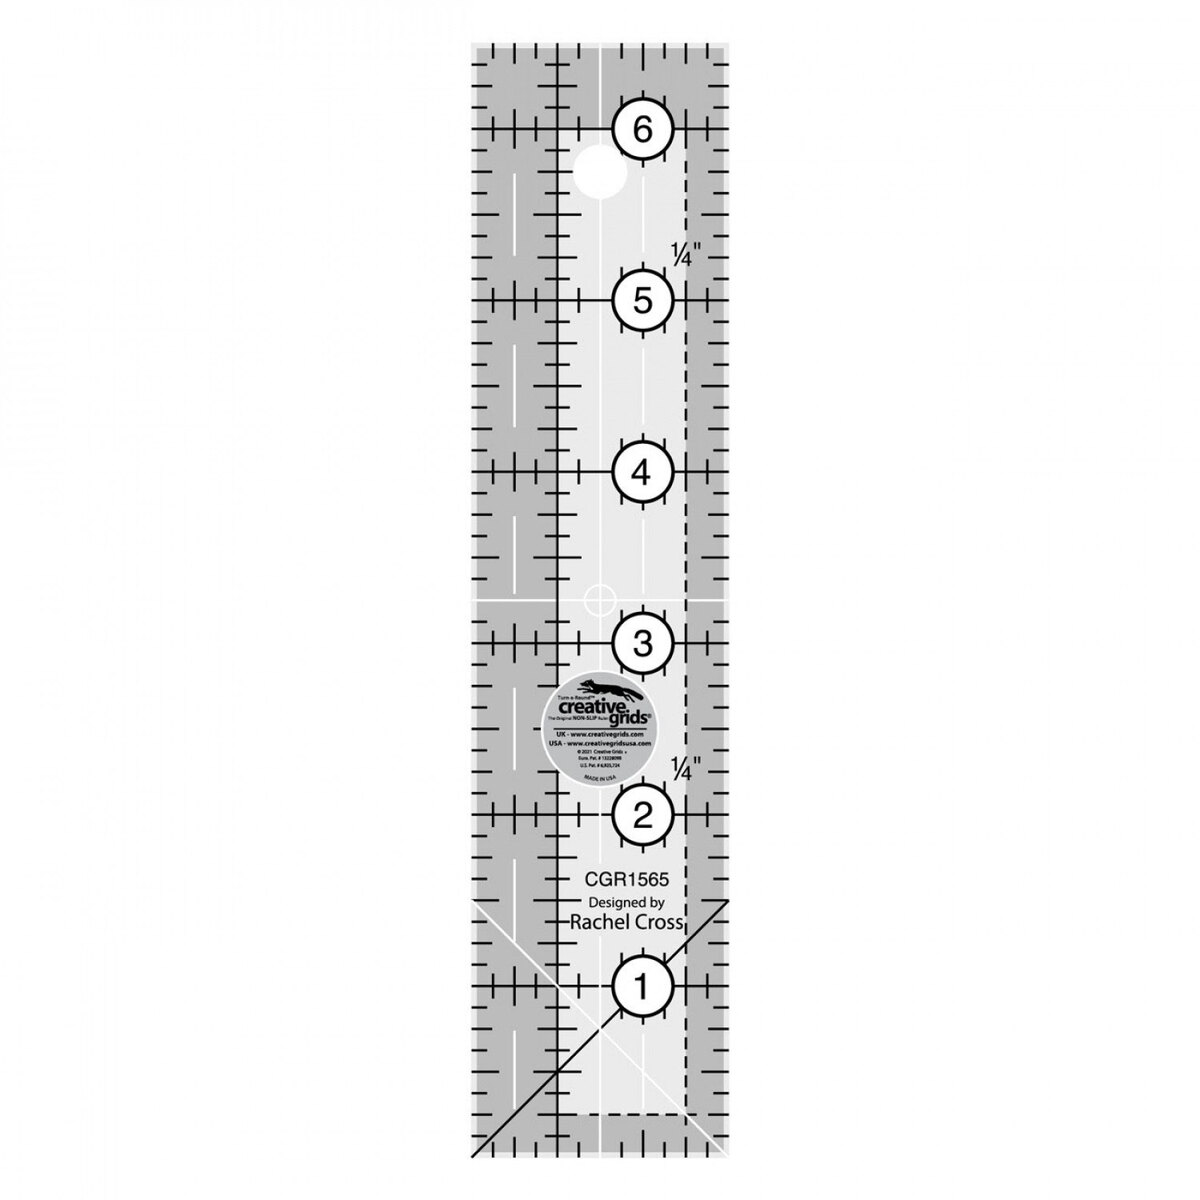 Creative Grids Square Quilt Ruler 10-1/2in x 10-1/2in - CGR10